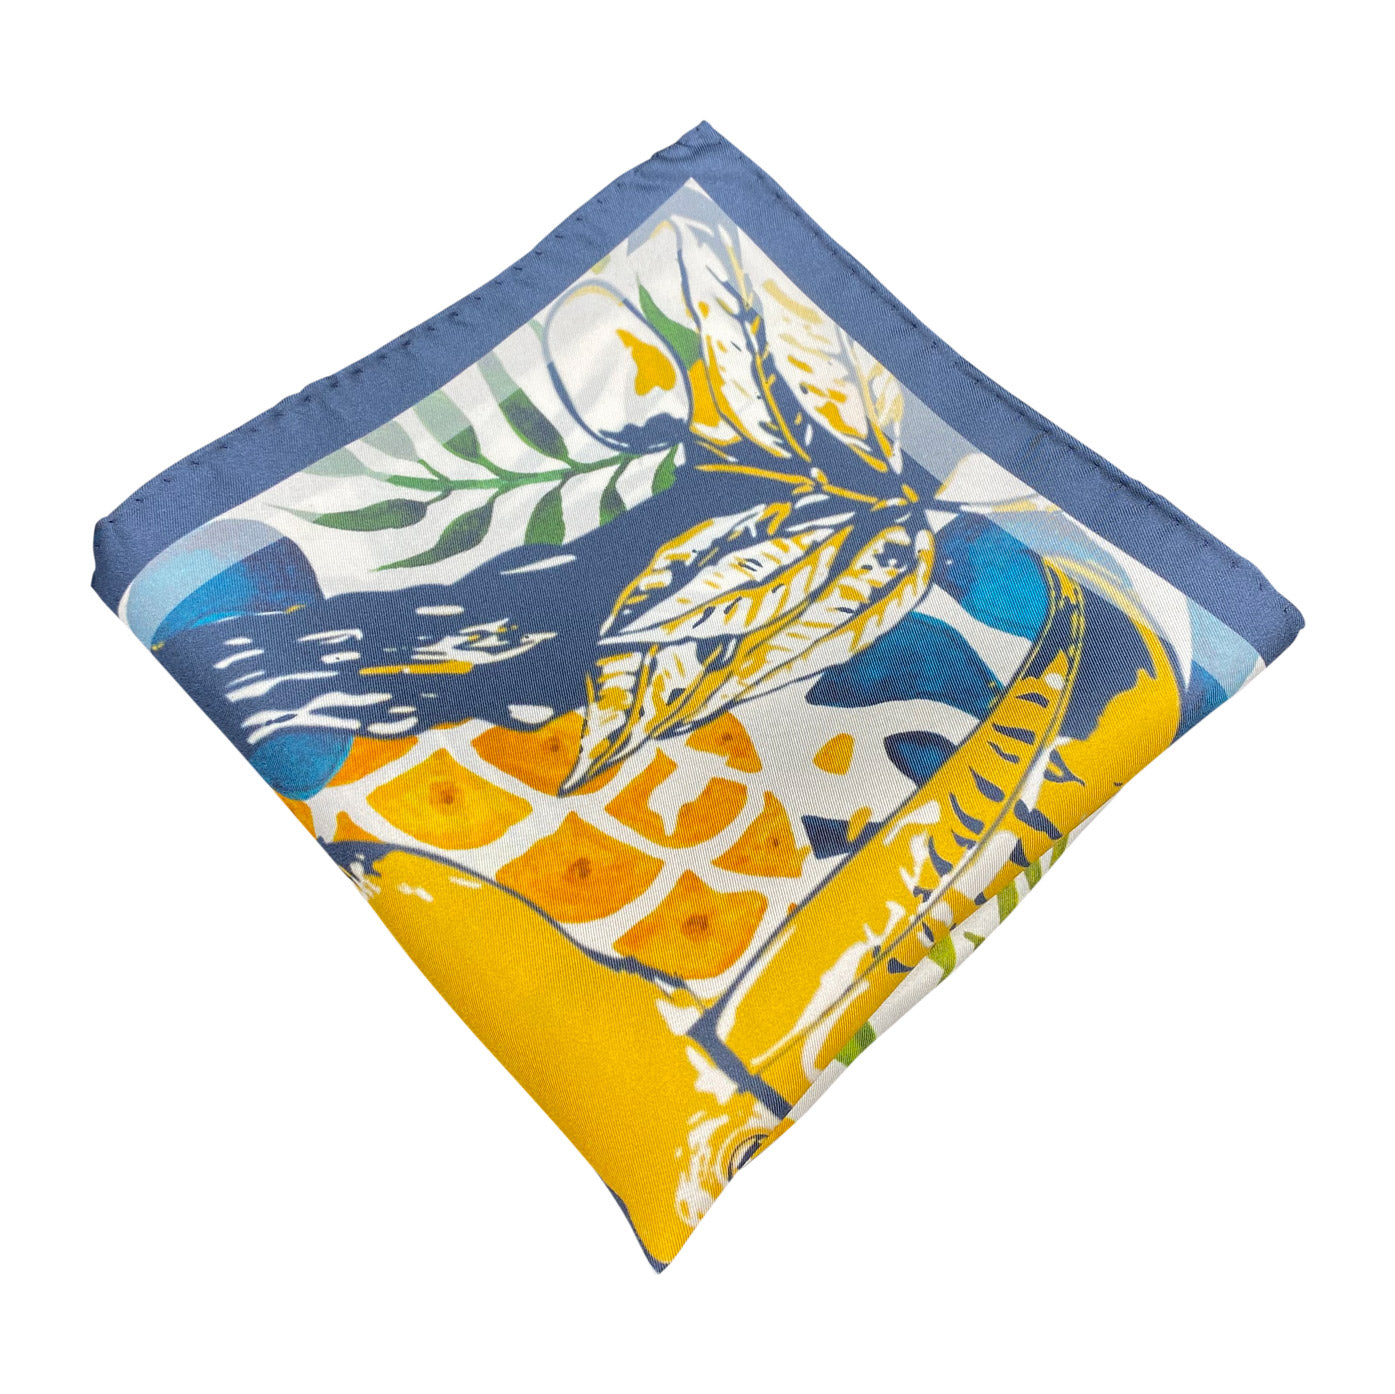 Folded 'Tees' silk pocket square from SOHO Scarves, showing the tropical silk screen pattern. Placed on a light background.